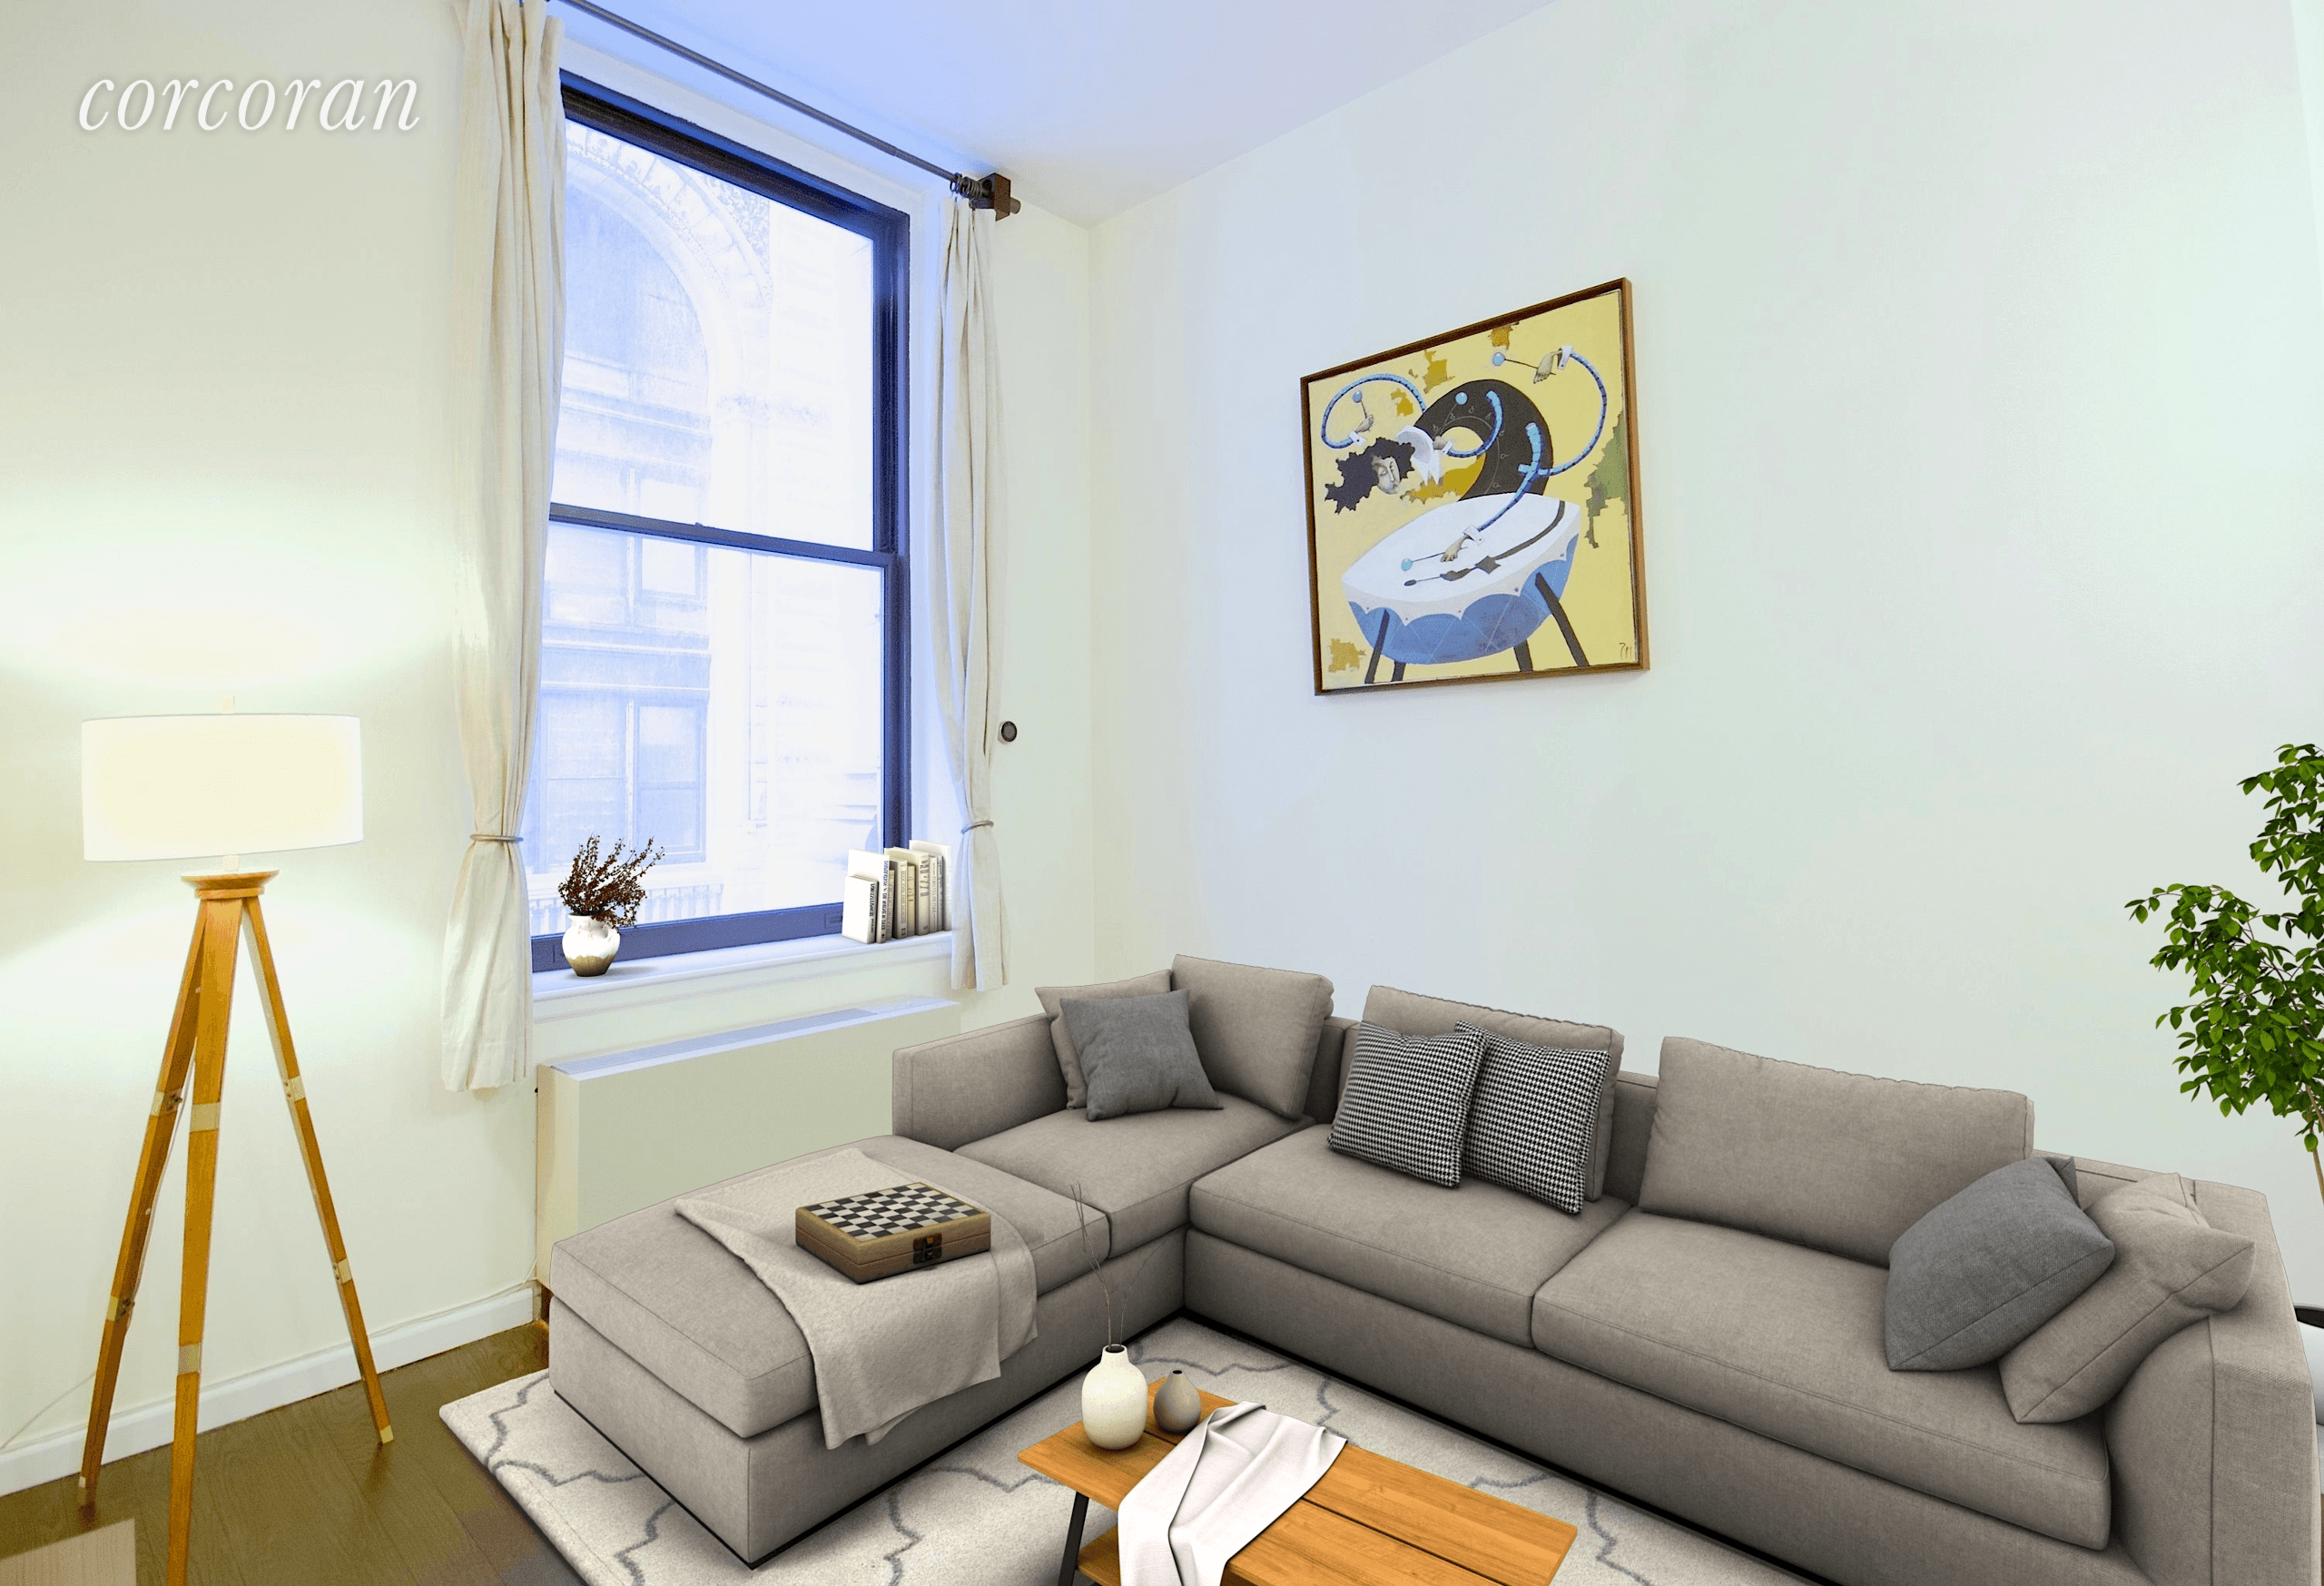 Residence 3 A, One Bedroom apartment with soaring 11 feet high ceilings, is an excellent opportunity to experience life at the Landmarked American Tract Society Building.